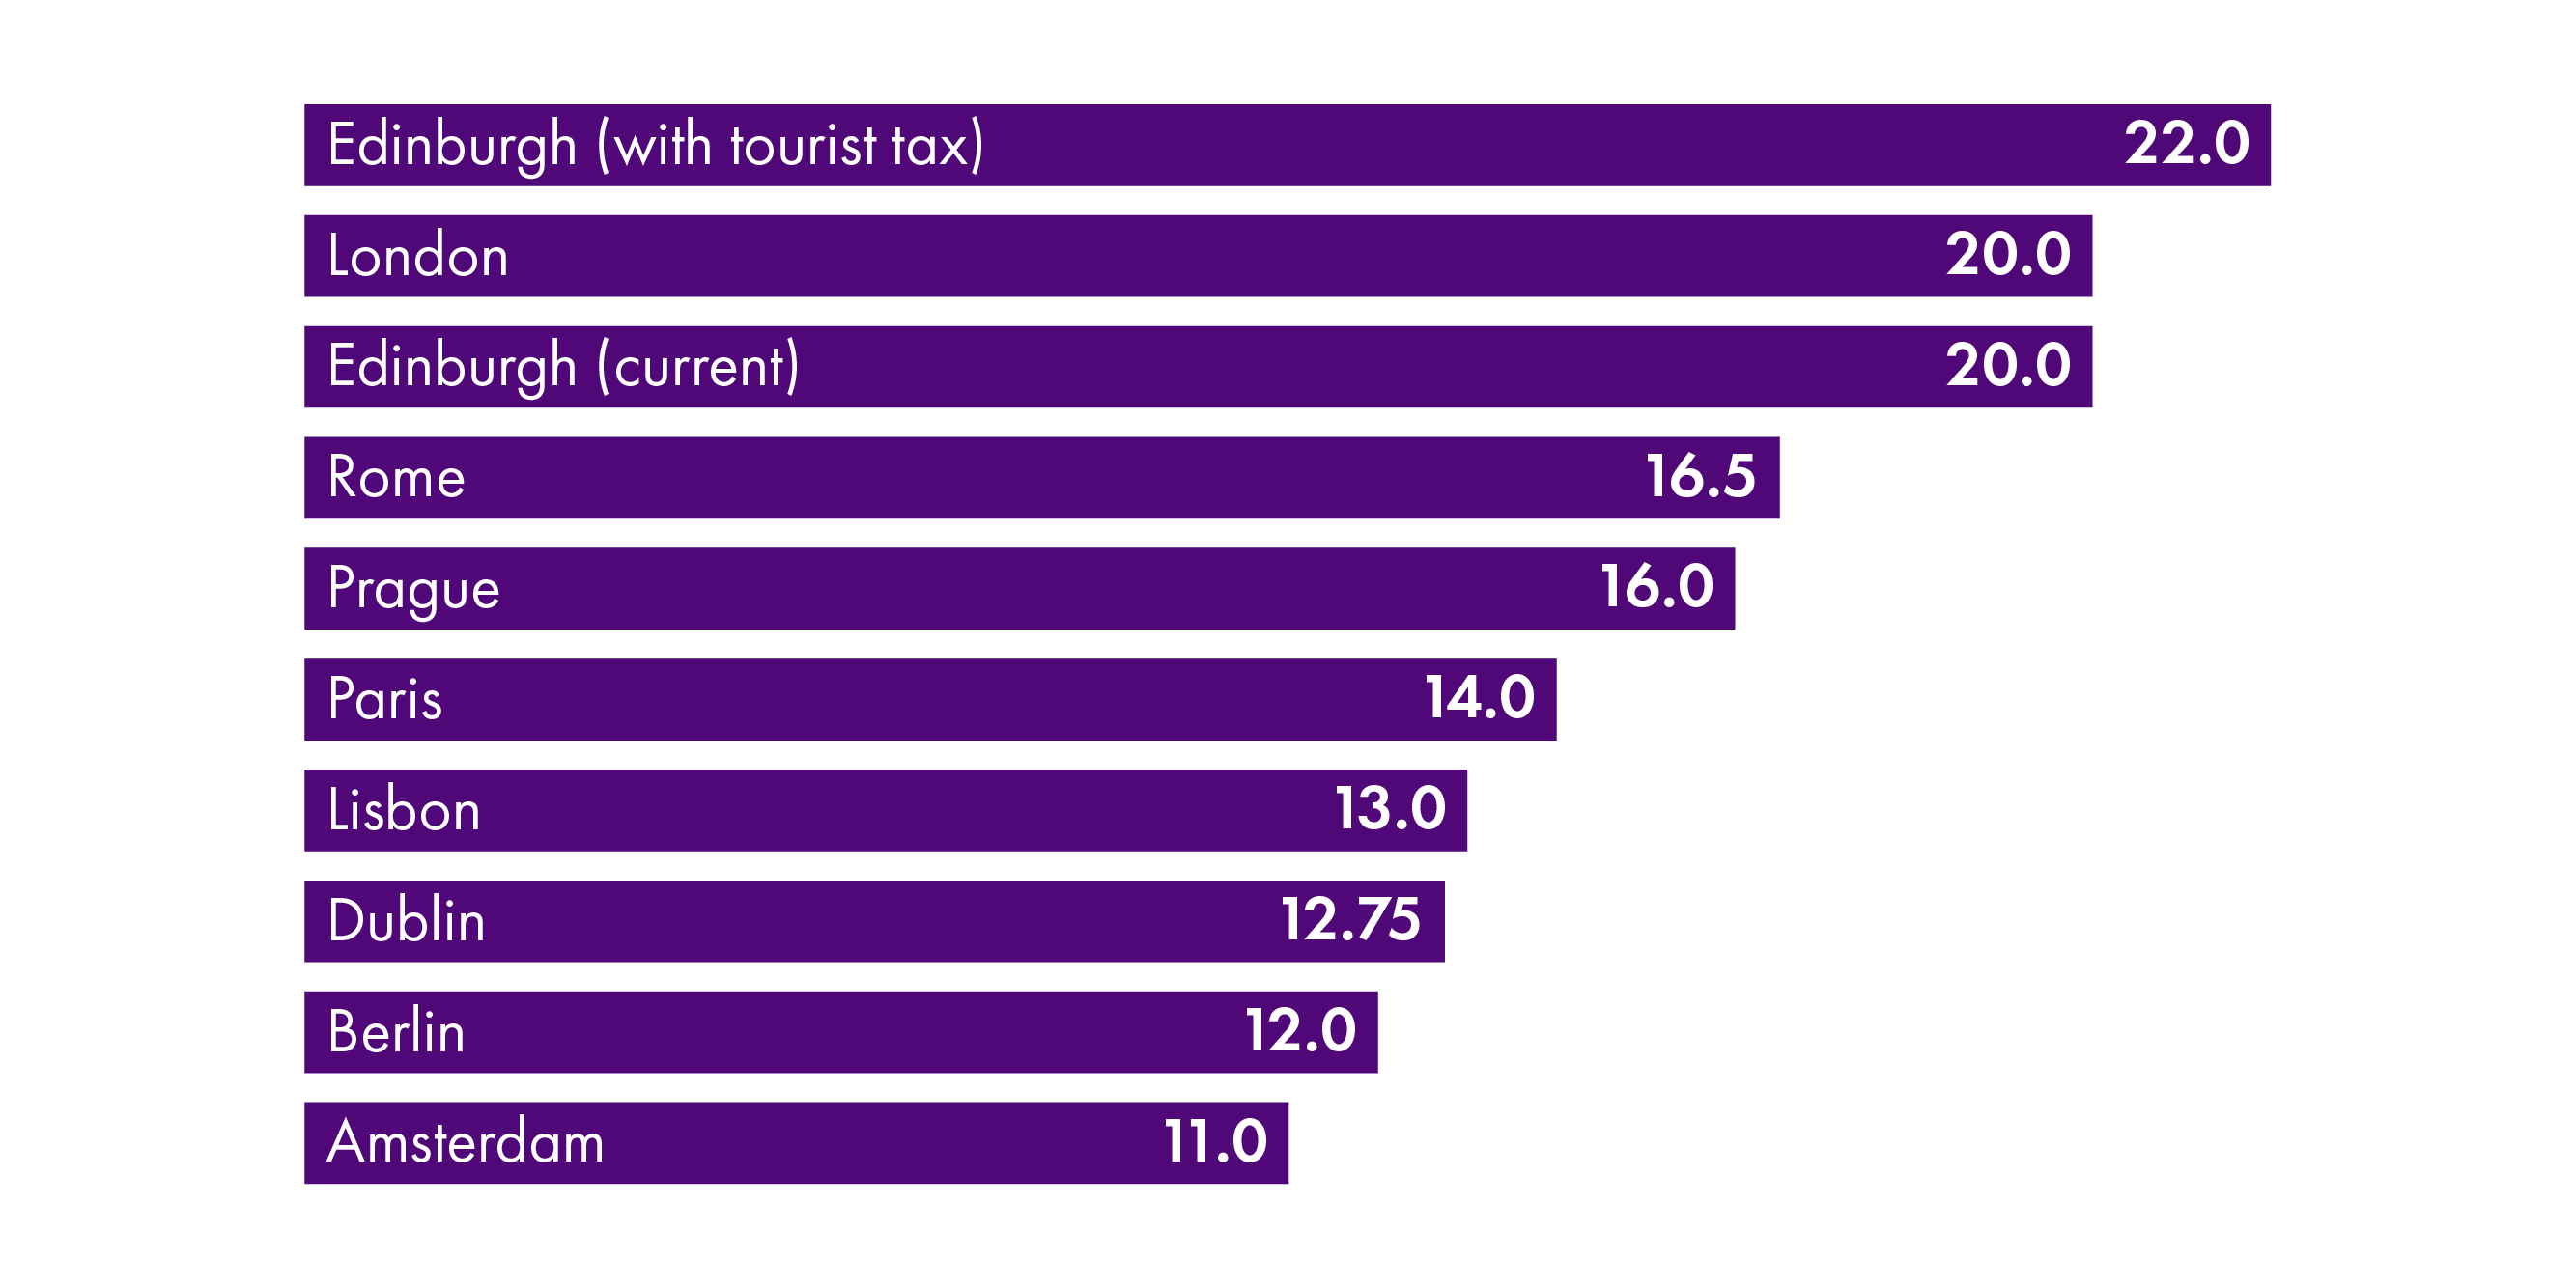 Chart showing a comparison of tourist taxes with a proposed Edinburgh transient visitor levy.